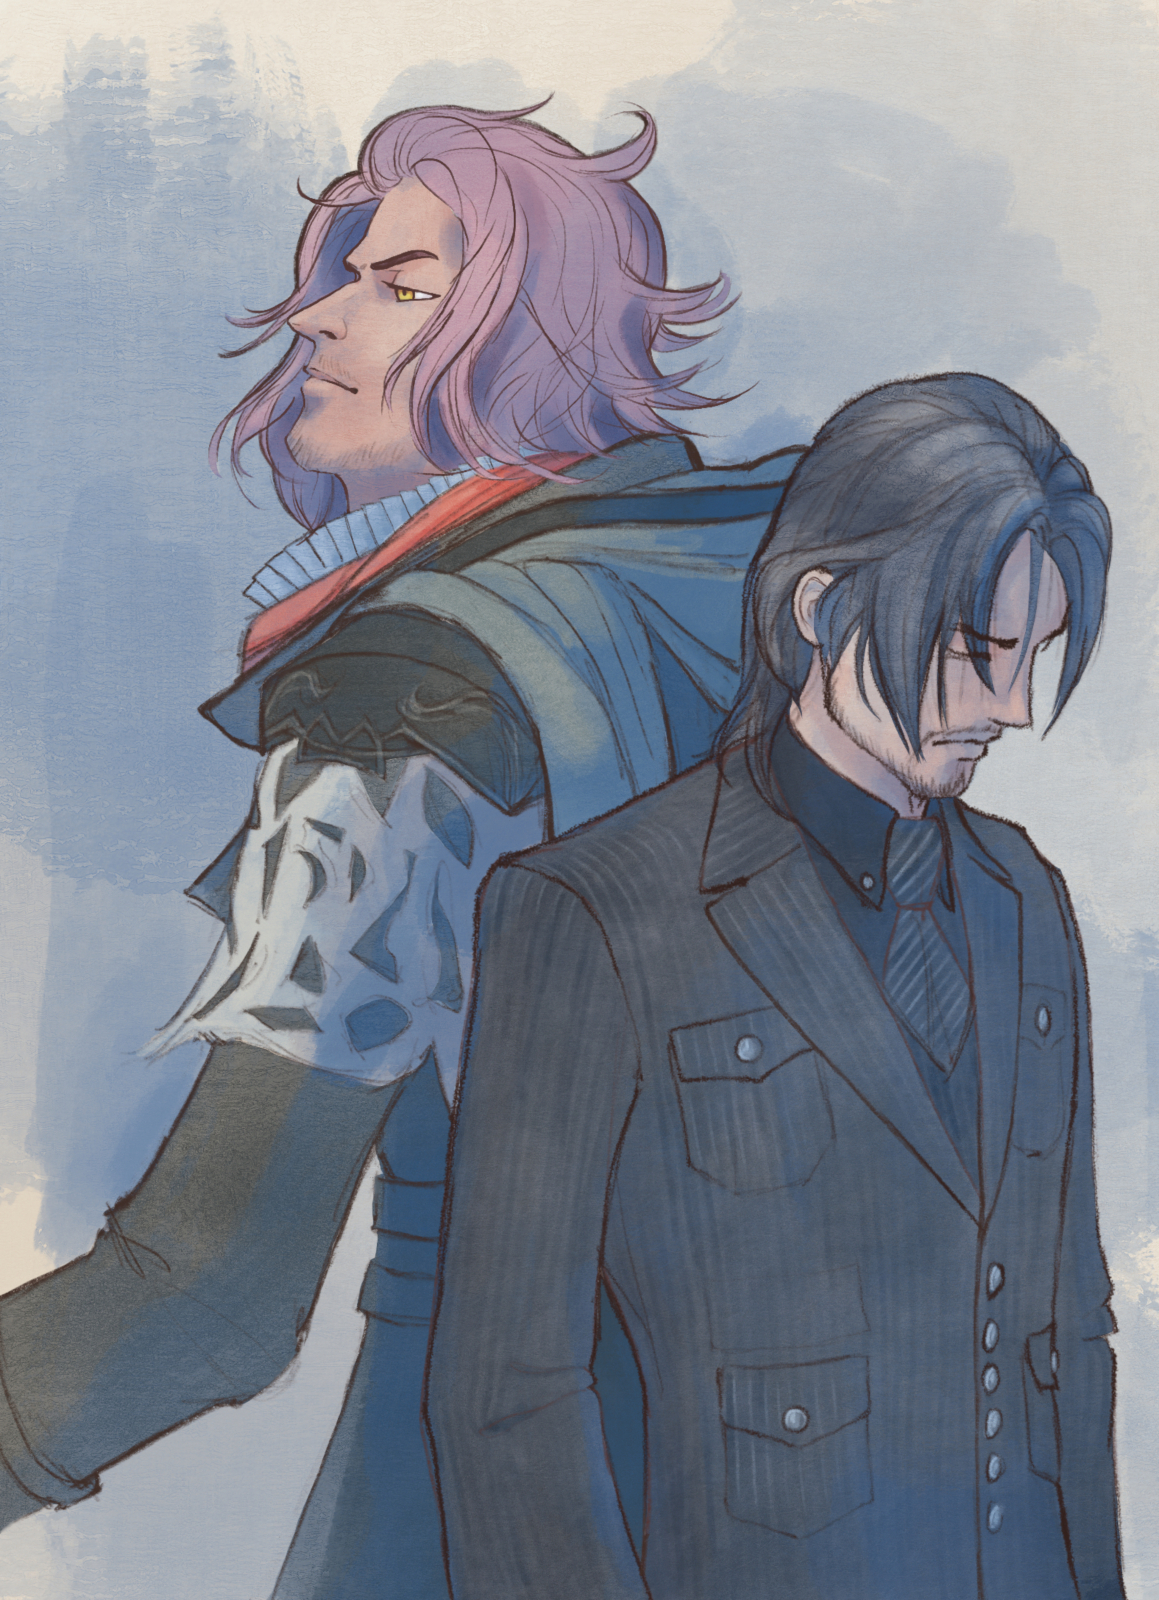 Ardyn Izunia and Noctis Lucis Caelum standing back to back.